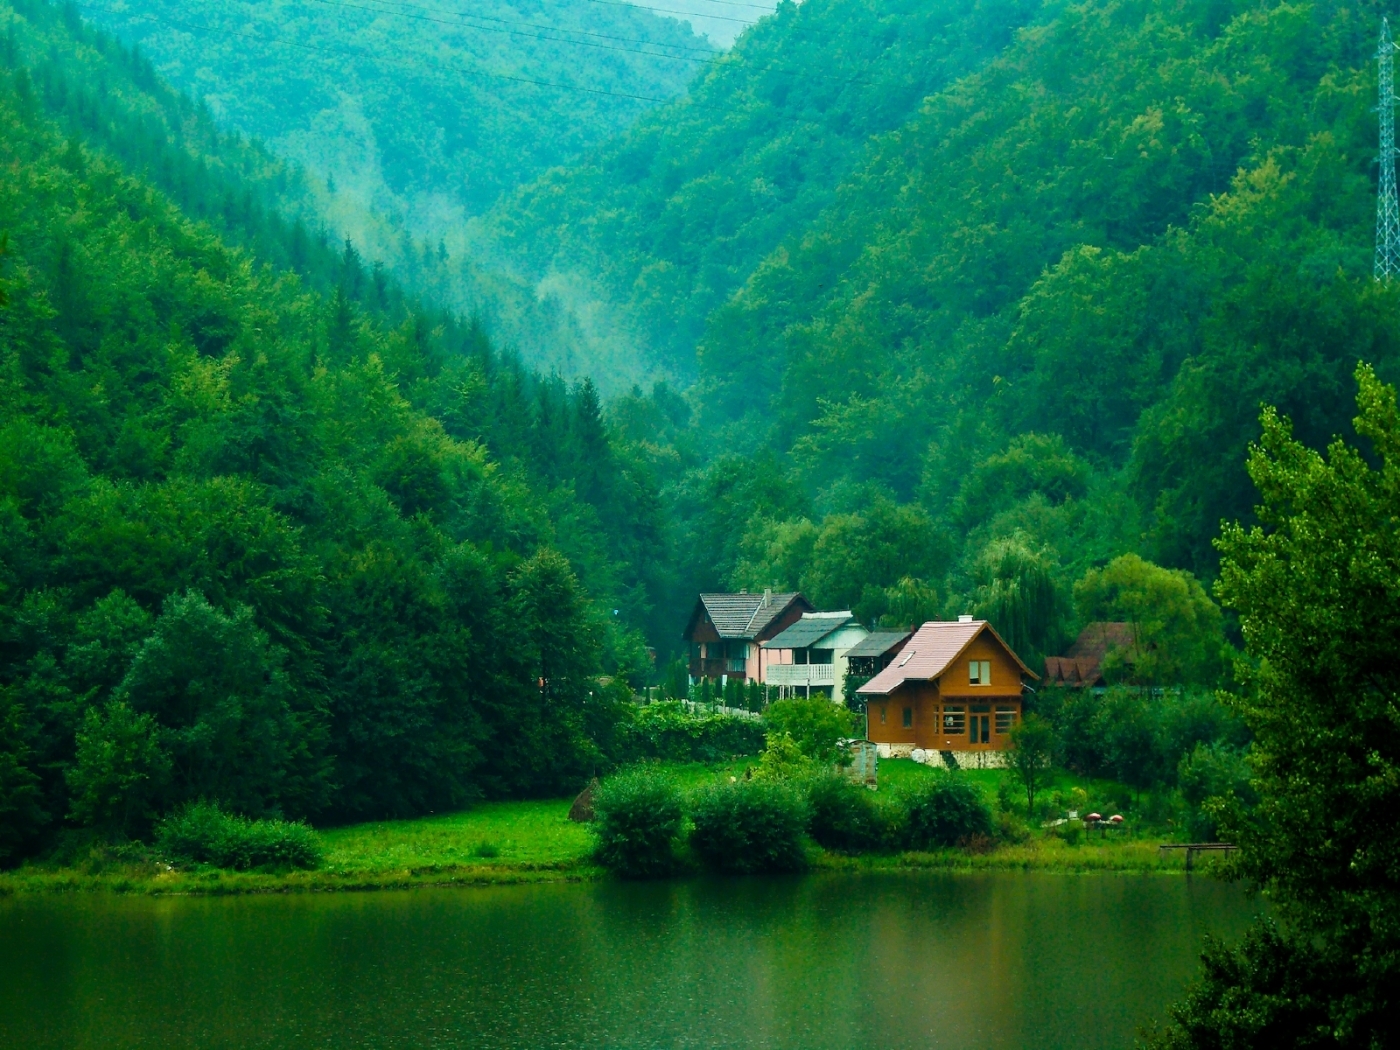 green, nature, houses, landscape lock screen backgrounds